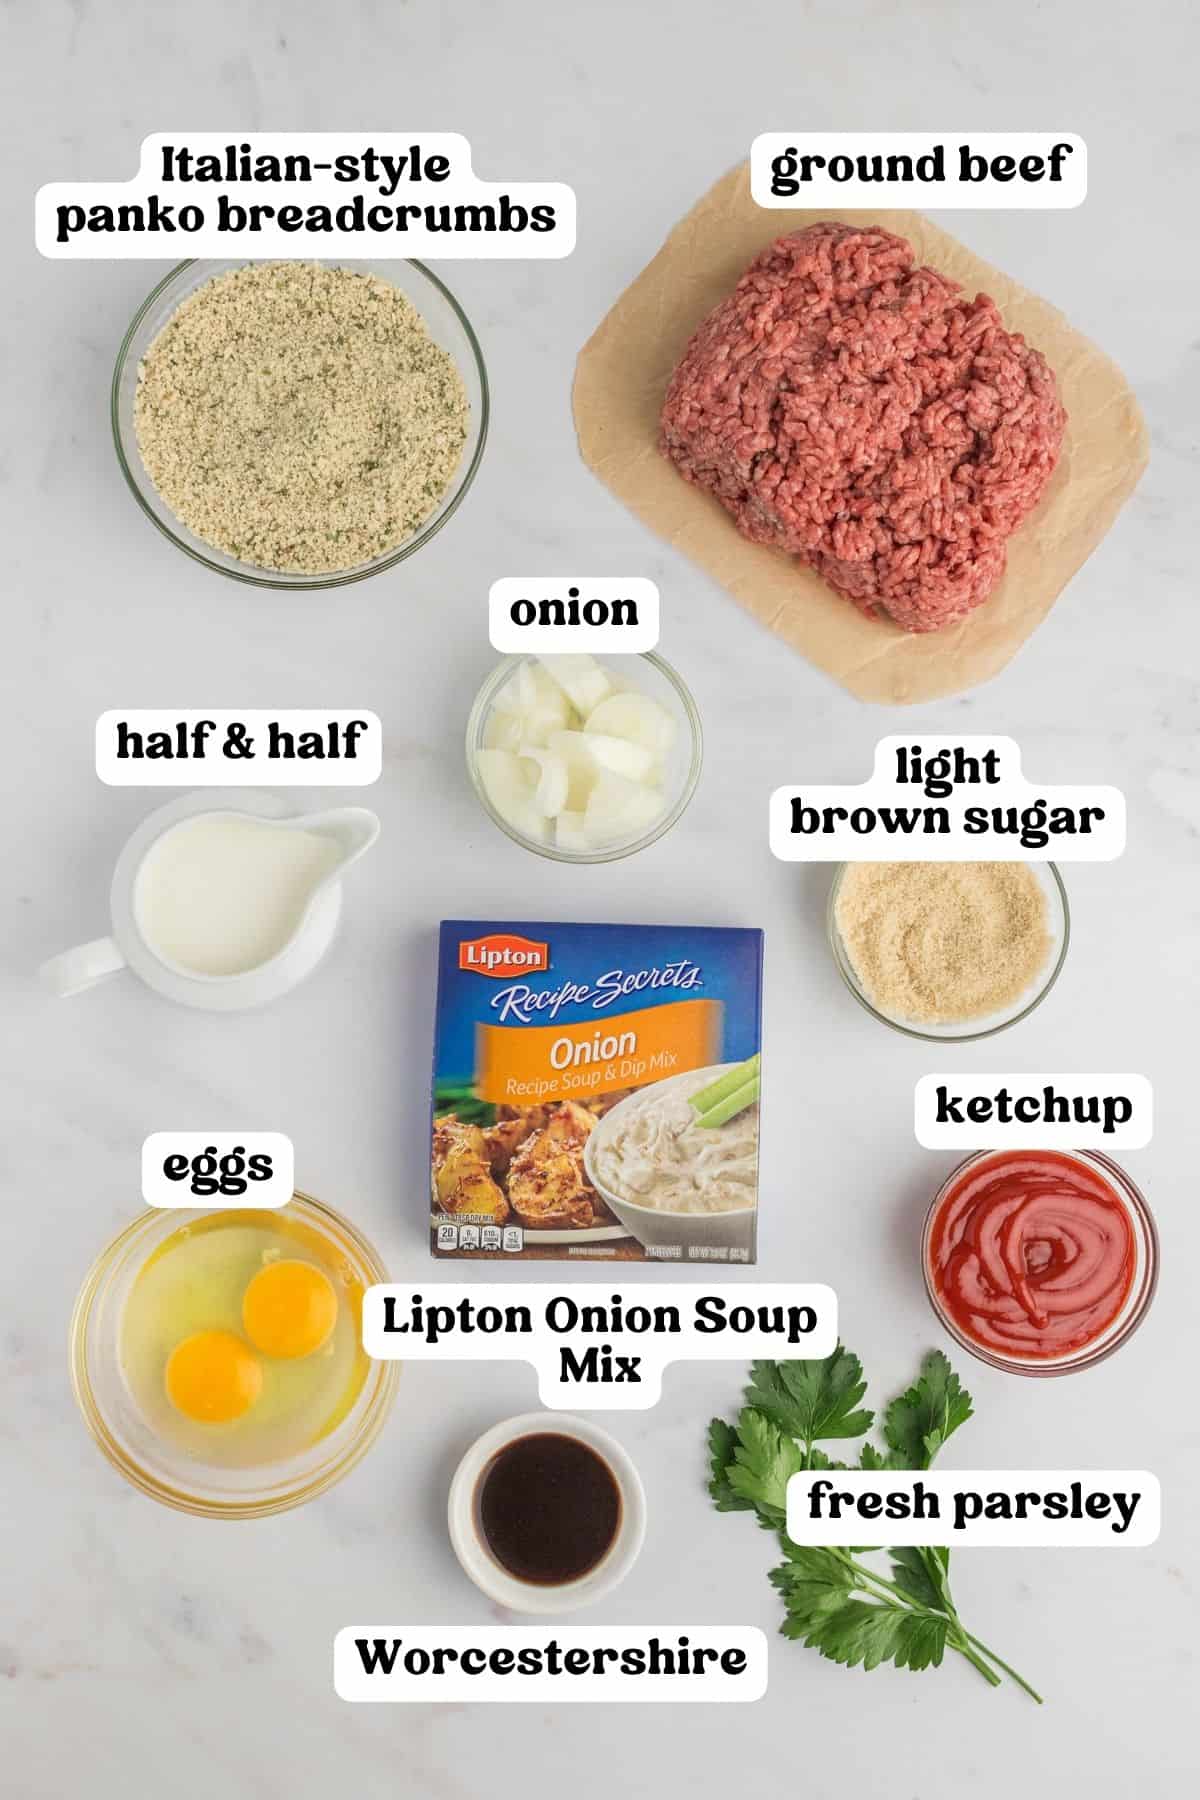 Italian style panko breadcrumbs, ground beef, half and half, chopped onion, light brown sugar, 2 eggs, Lipton onion soup mix, fresh parsley, ketchup, and Worchestershire sauce. 